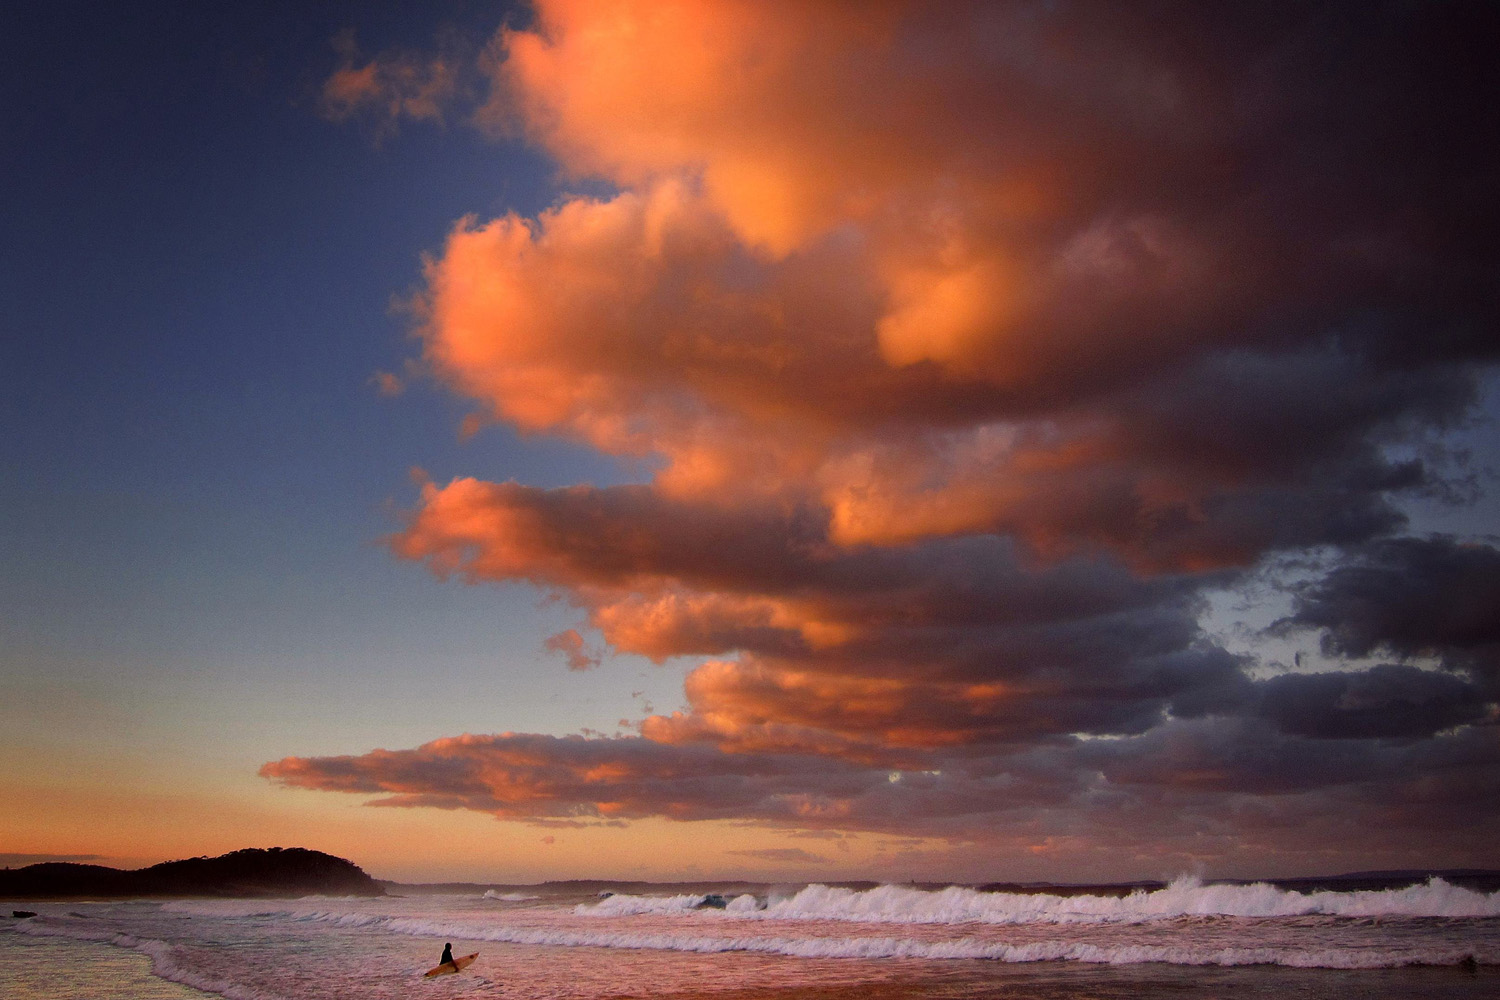 Surfer holding her board wades through the surf as clouds above are lit by the setting sun at Mollymook Beach on the south coast of New South Wales